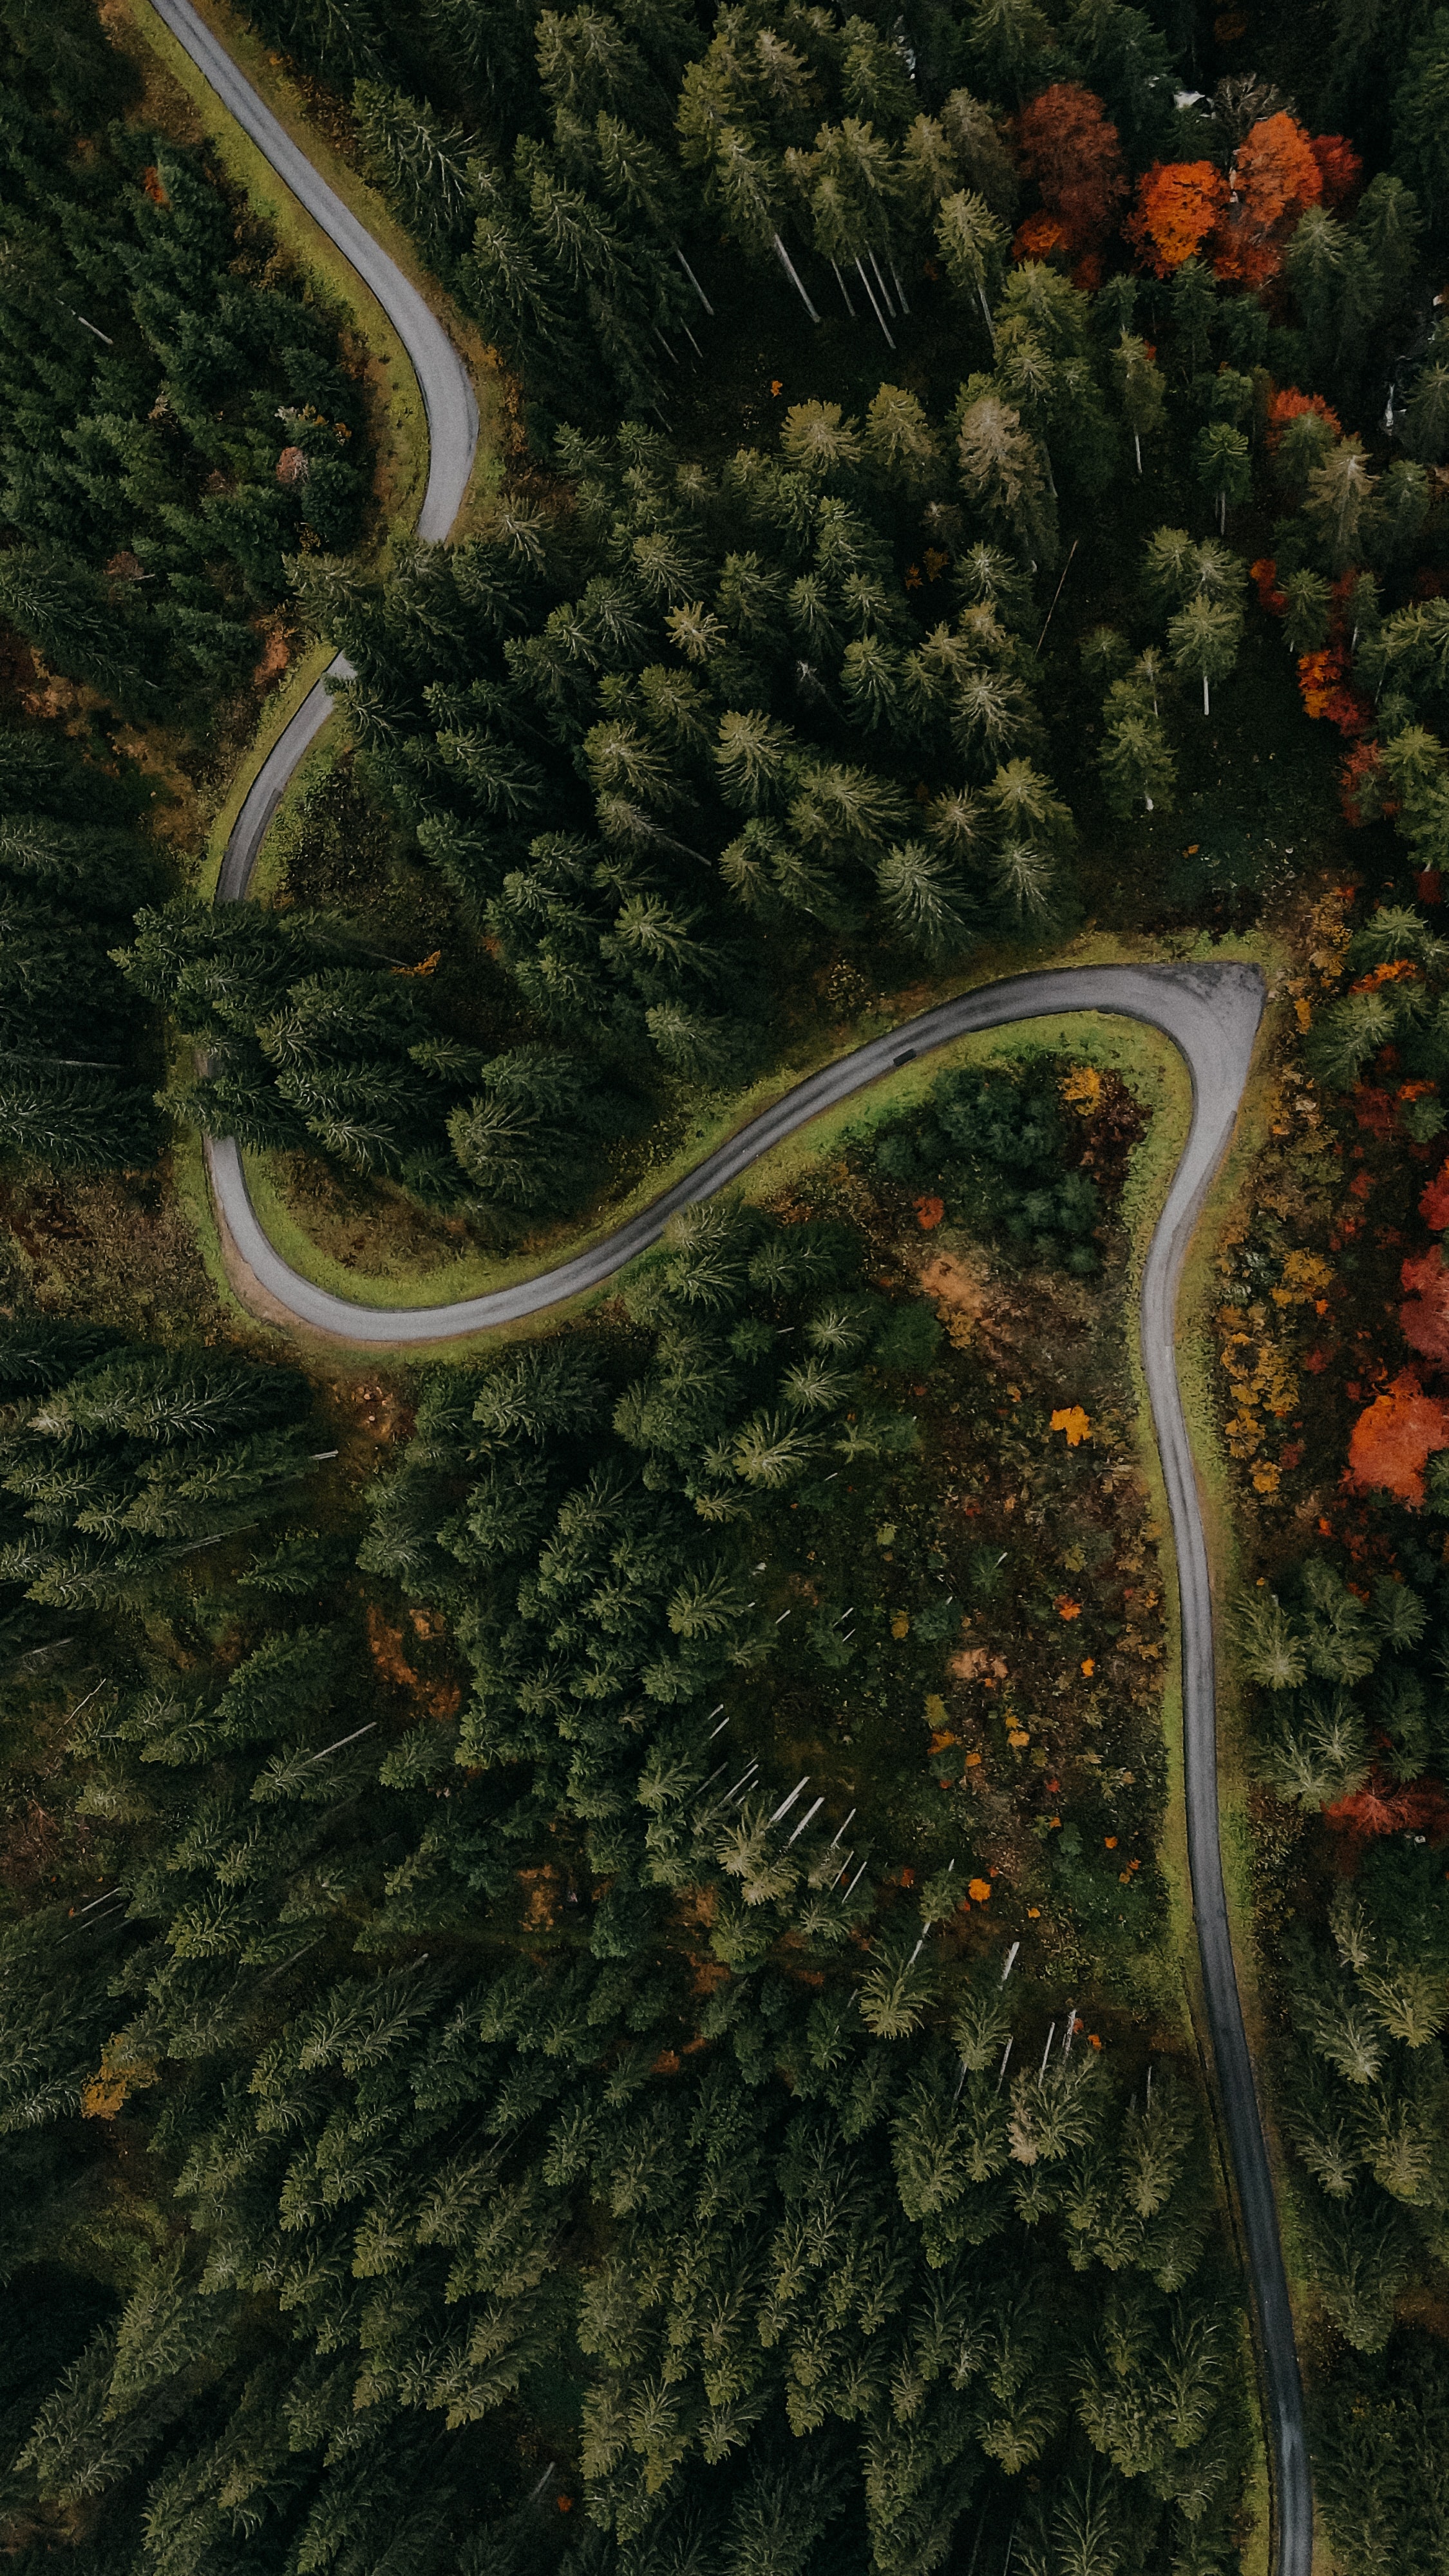 New Lock Screen Wallpapers nature, trees, view from above, road, turn, forest